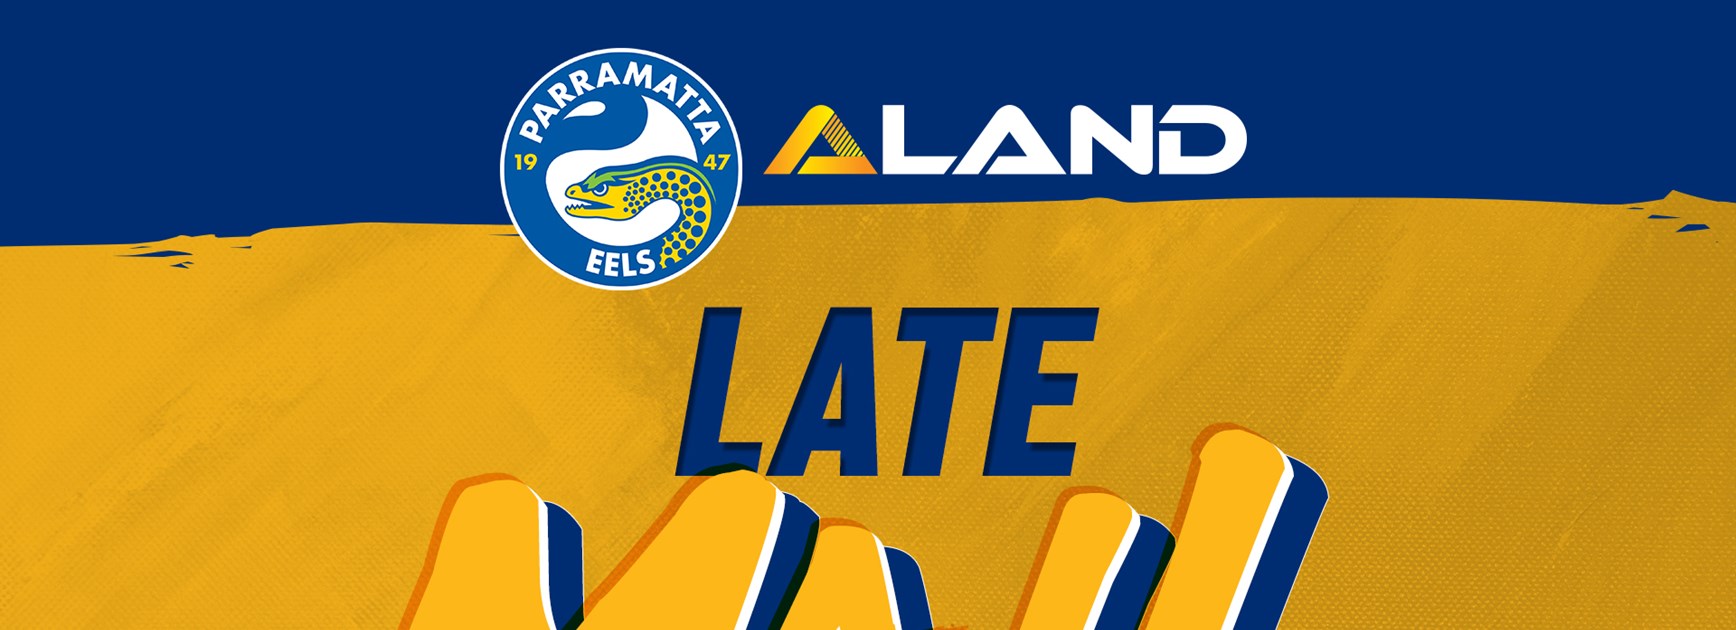 Dragons v Eels Late Mail